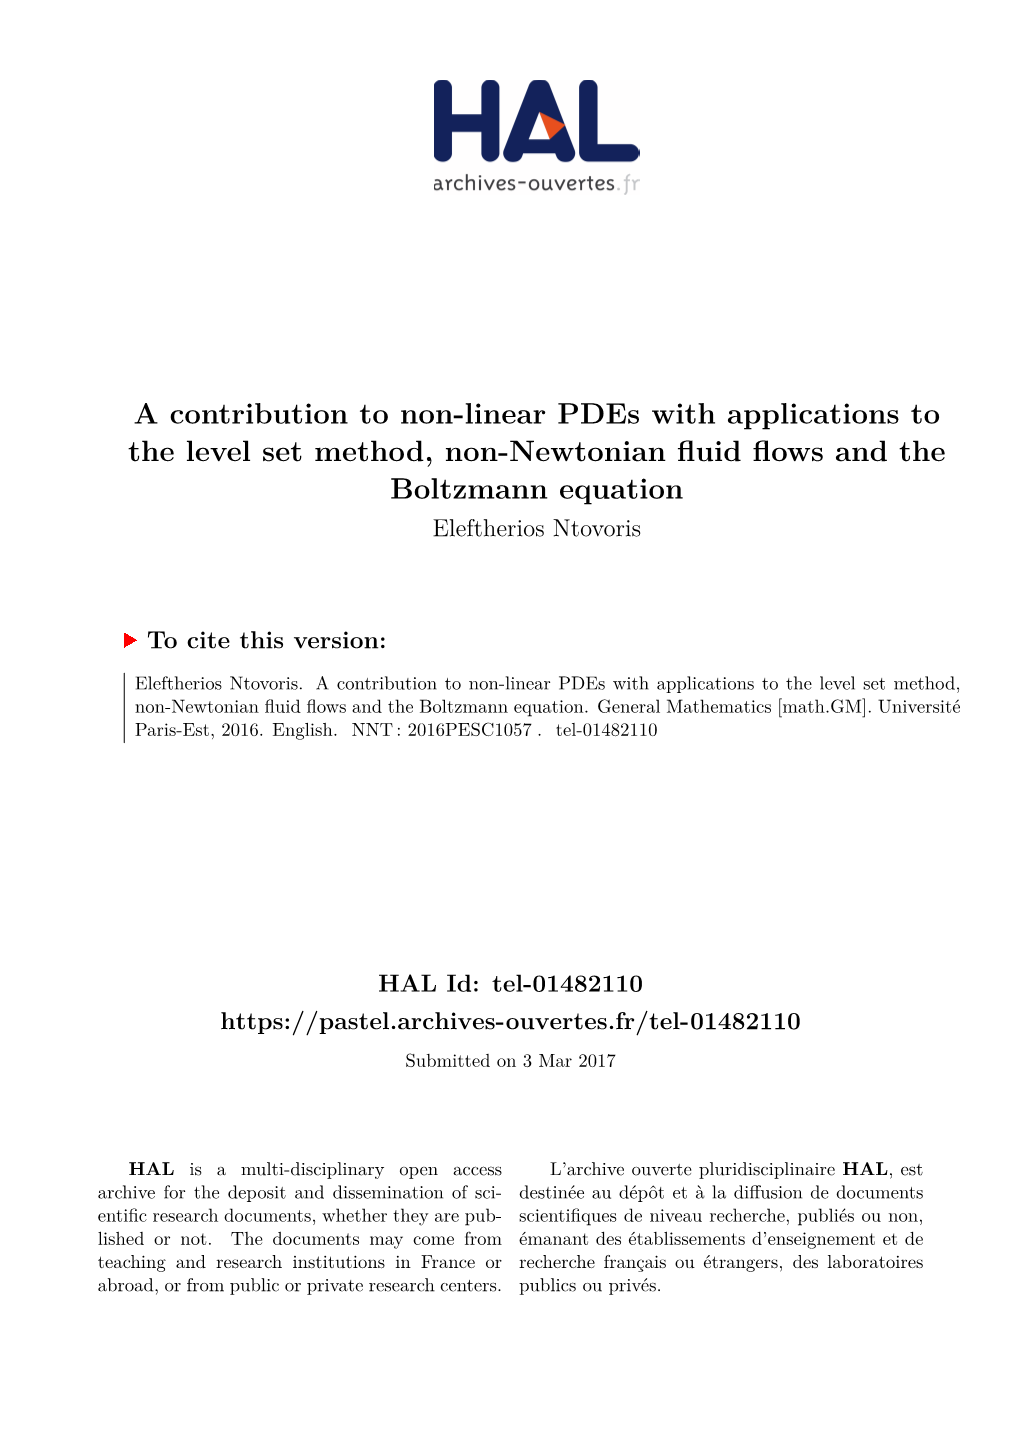 A Contribution to Non-Linear Pdes with Applications to the Level Set Method, Non-Newtonian Fluid Flows and the Boltzmann Equation Eleftherios Ntovoris